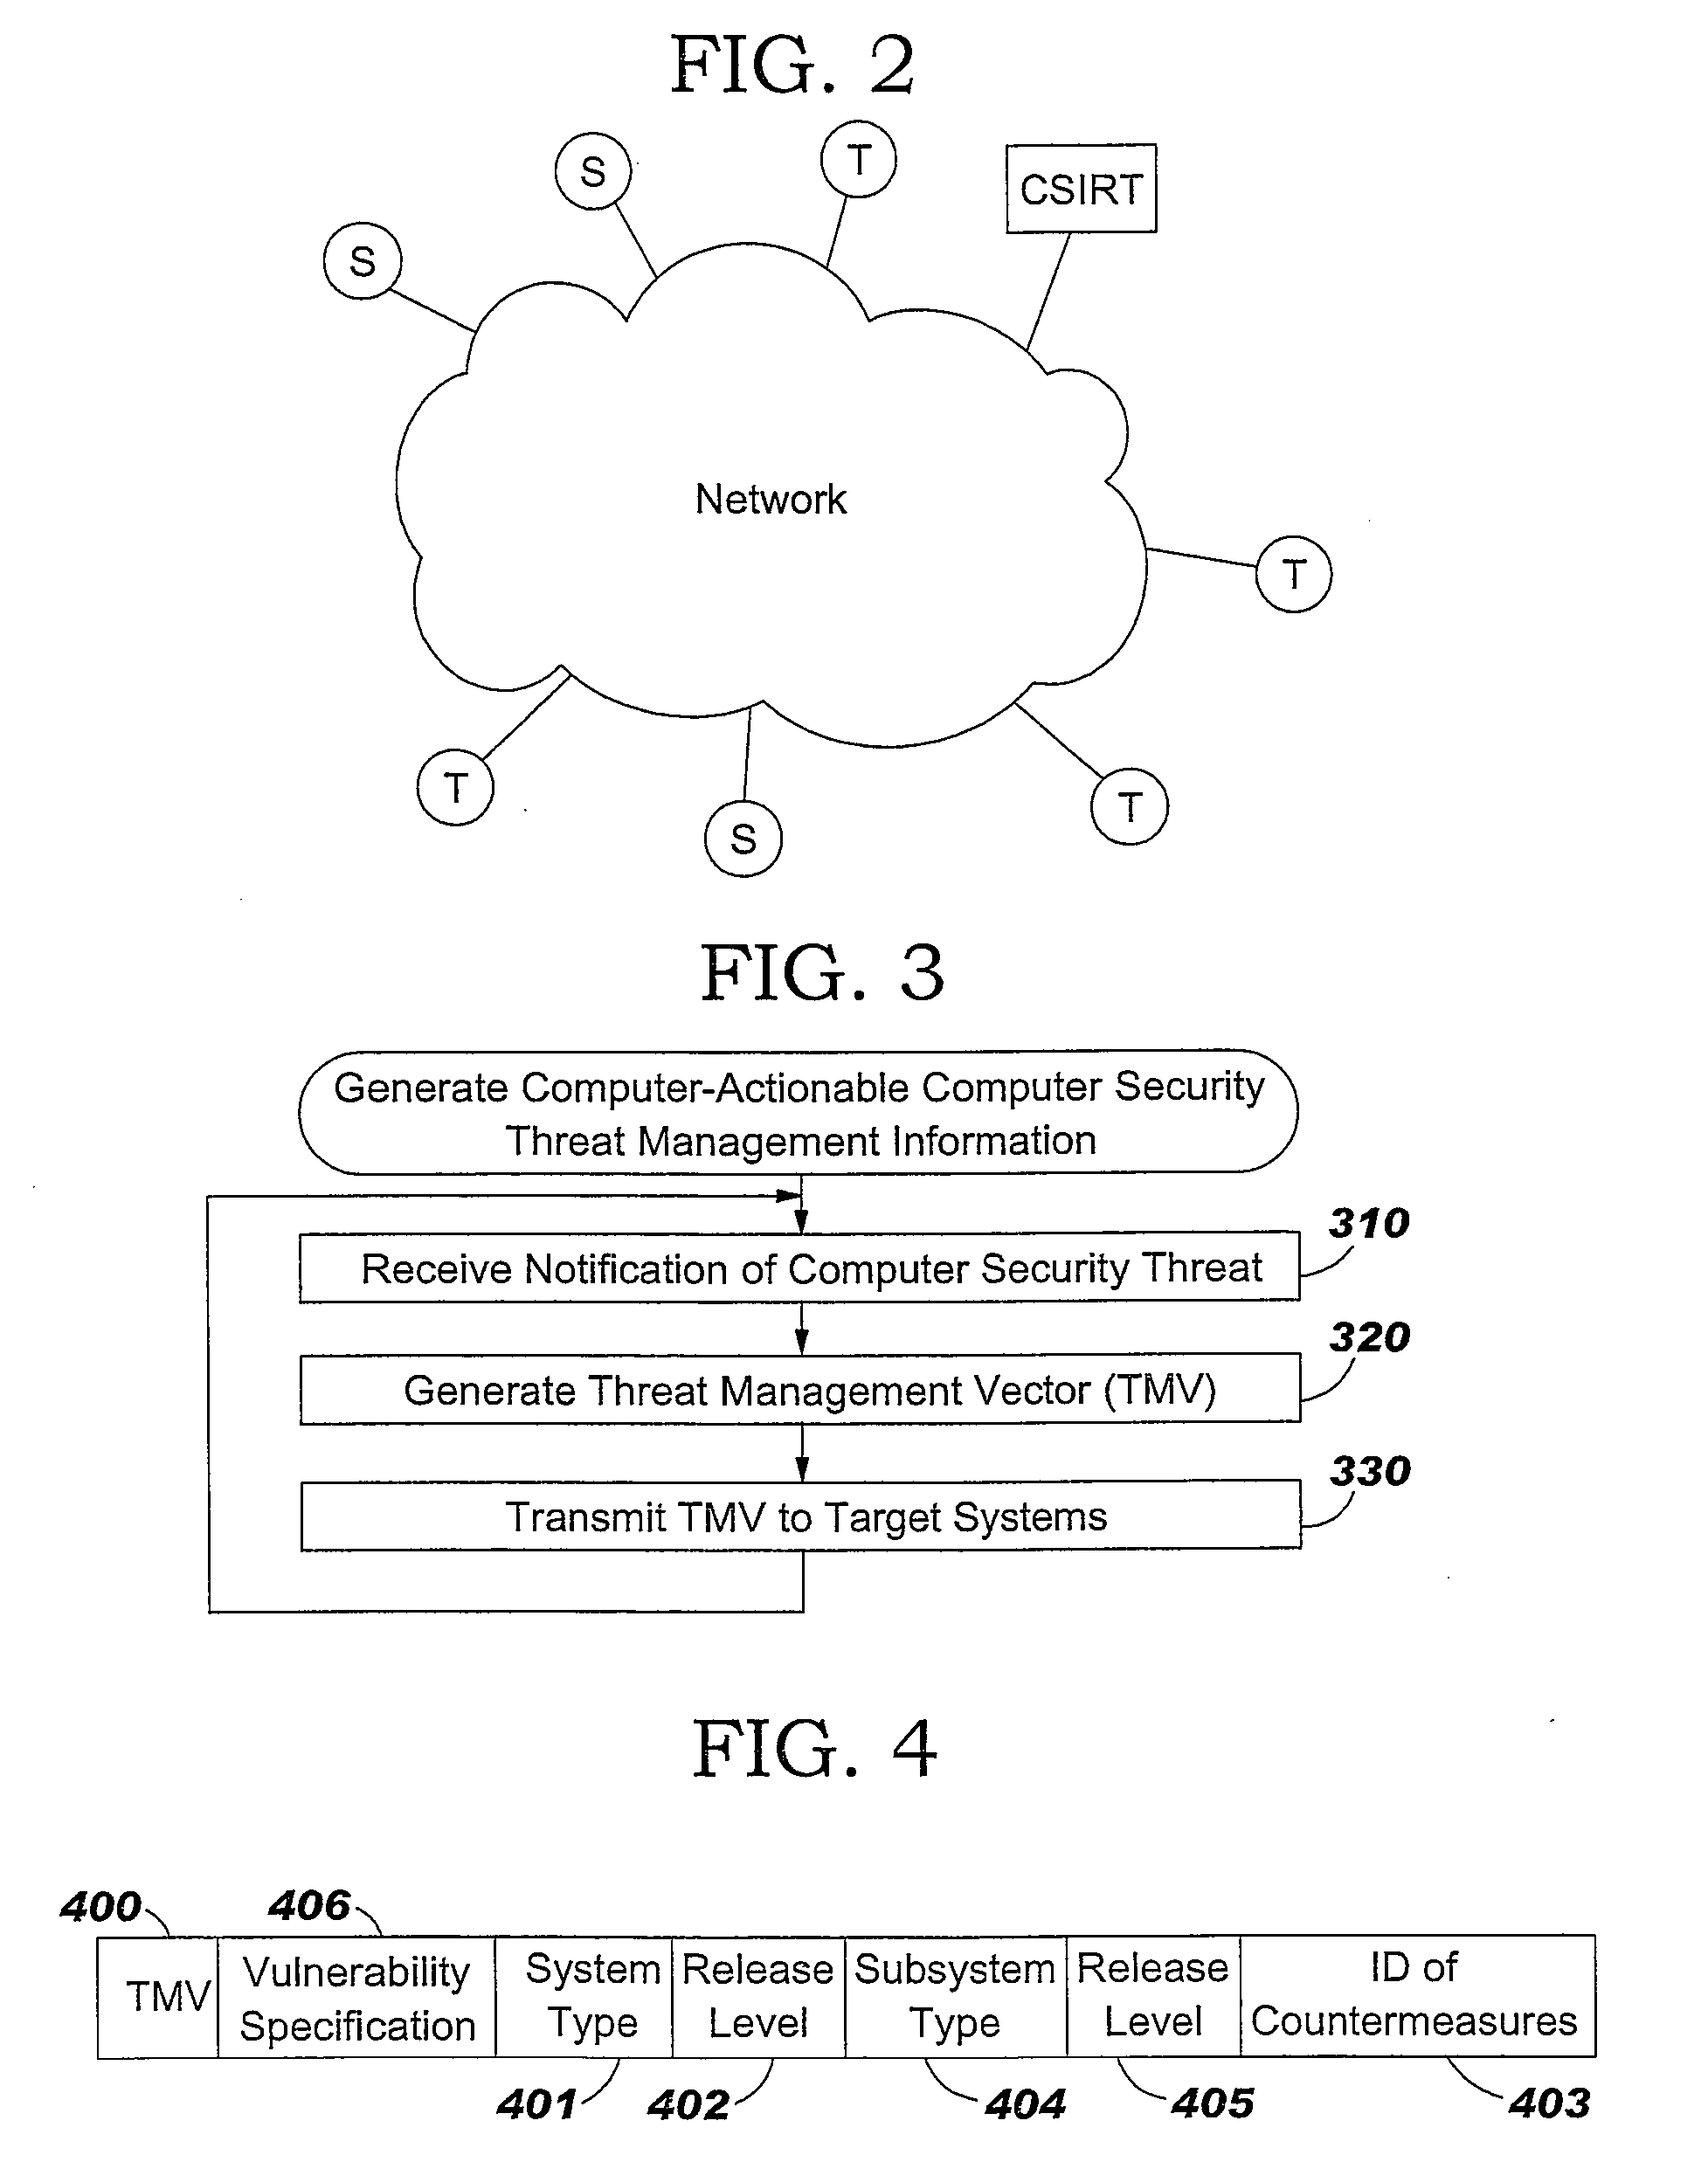 Method for Adminstration of Computer Security Threat Countermeasures to a Computer System